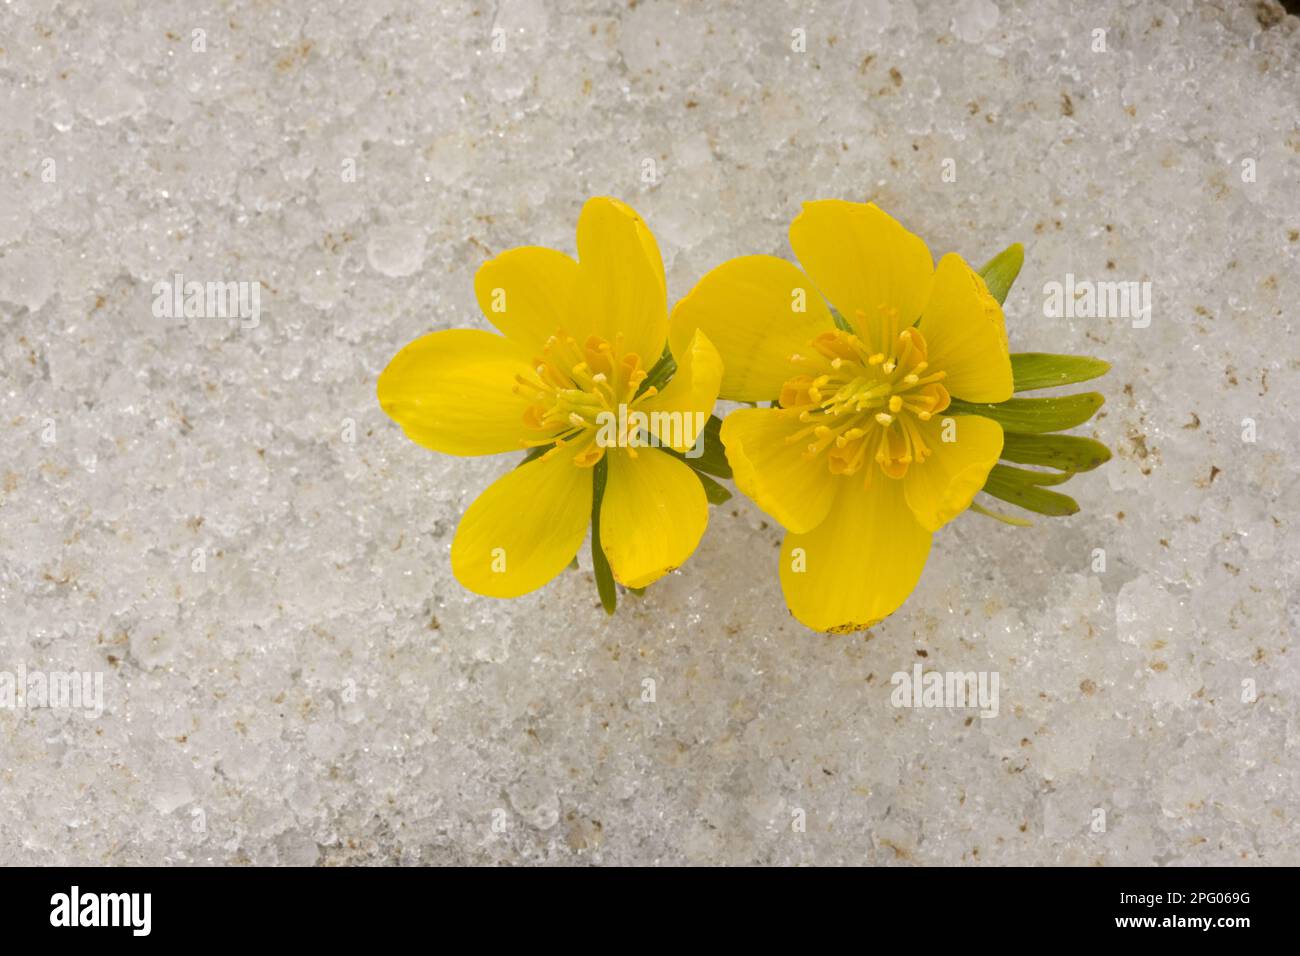 Winter aconite (Eranthis hyemalis) large-flowered form, flowering, in the snow at the snowline, Taurus Mountains, Anatolia, southern Turkey Stock Photo